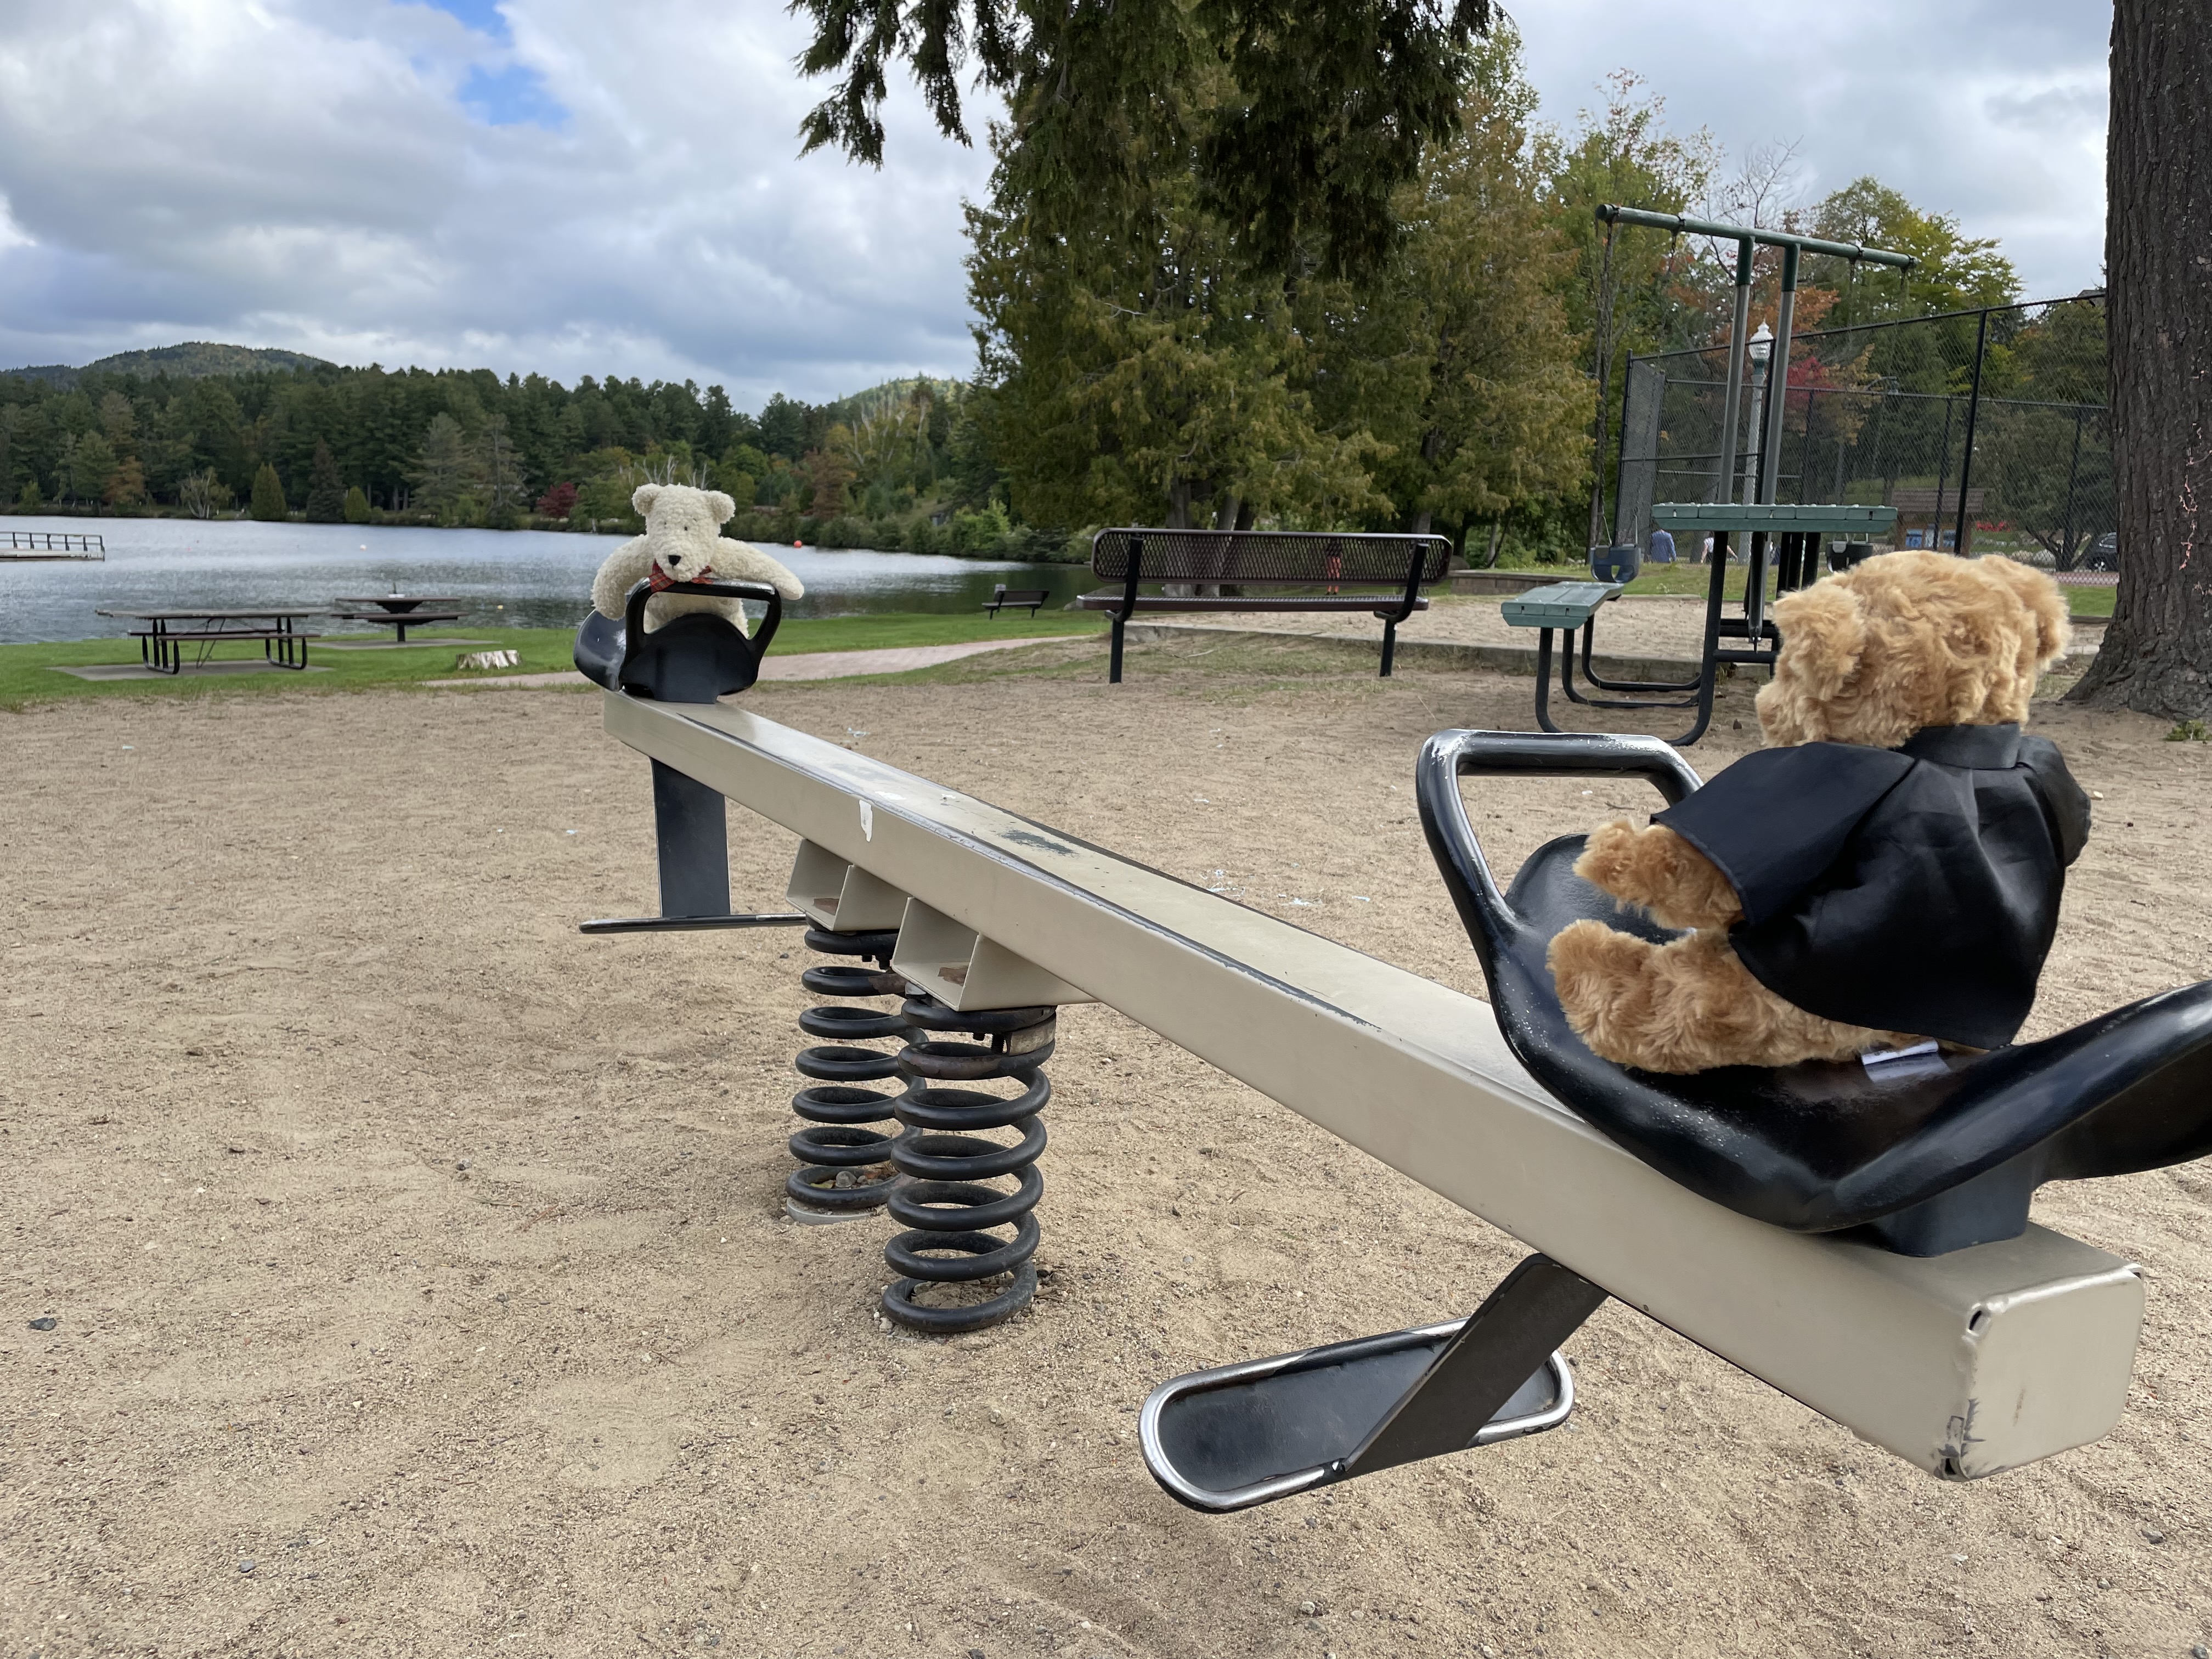 Two teddy bears sit on a teeter totter on a playground with a lake in the background.